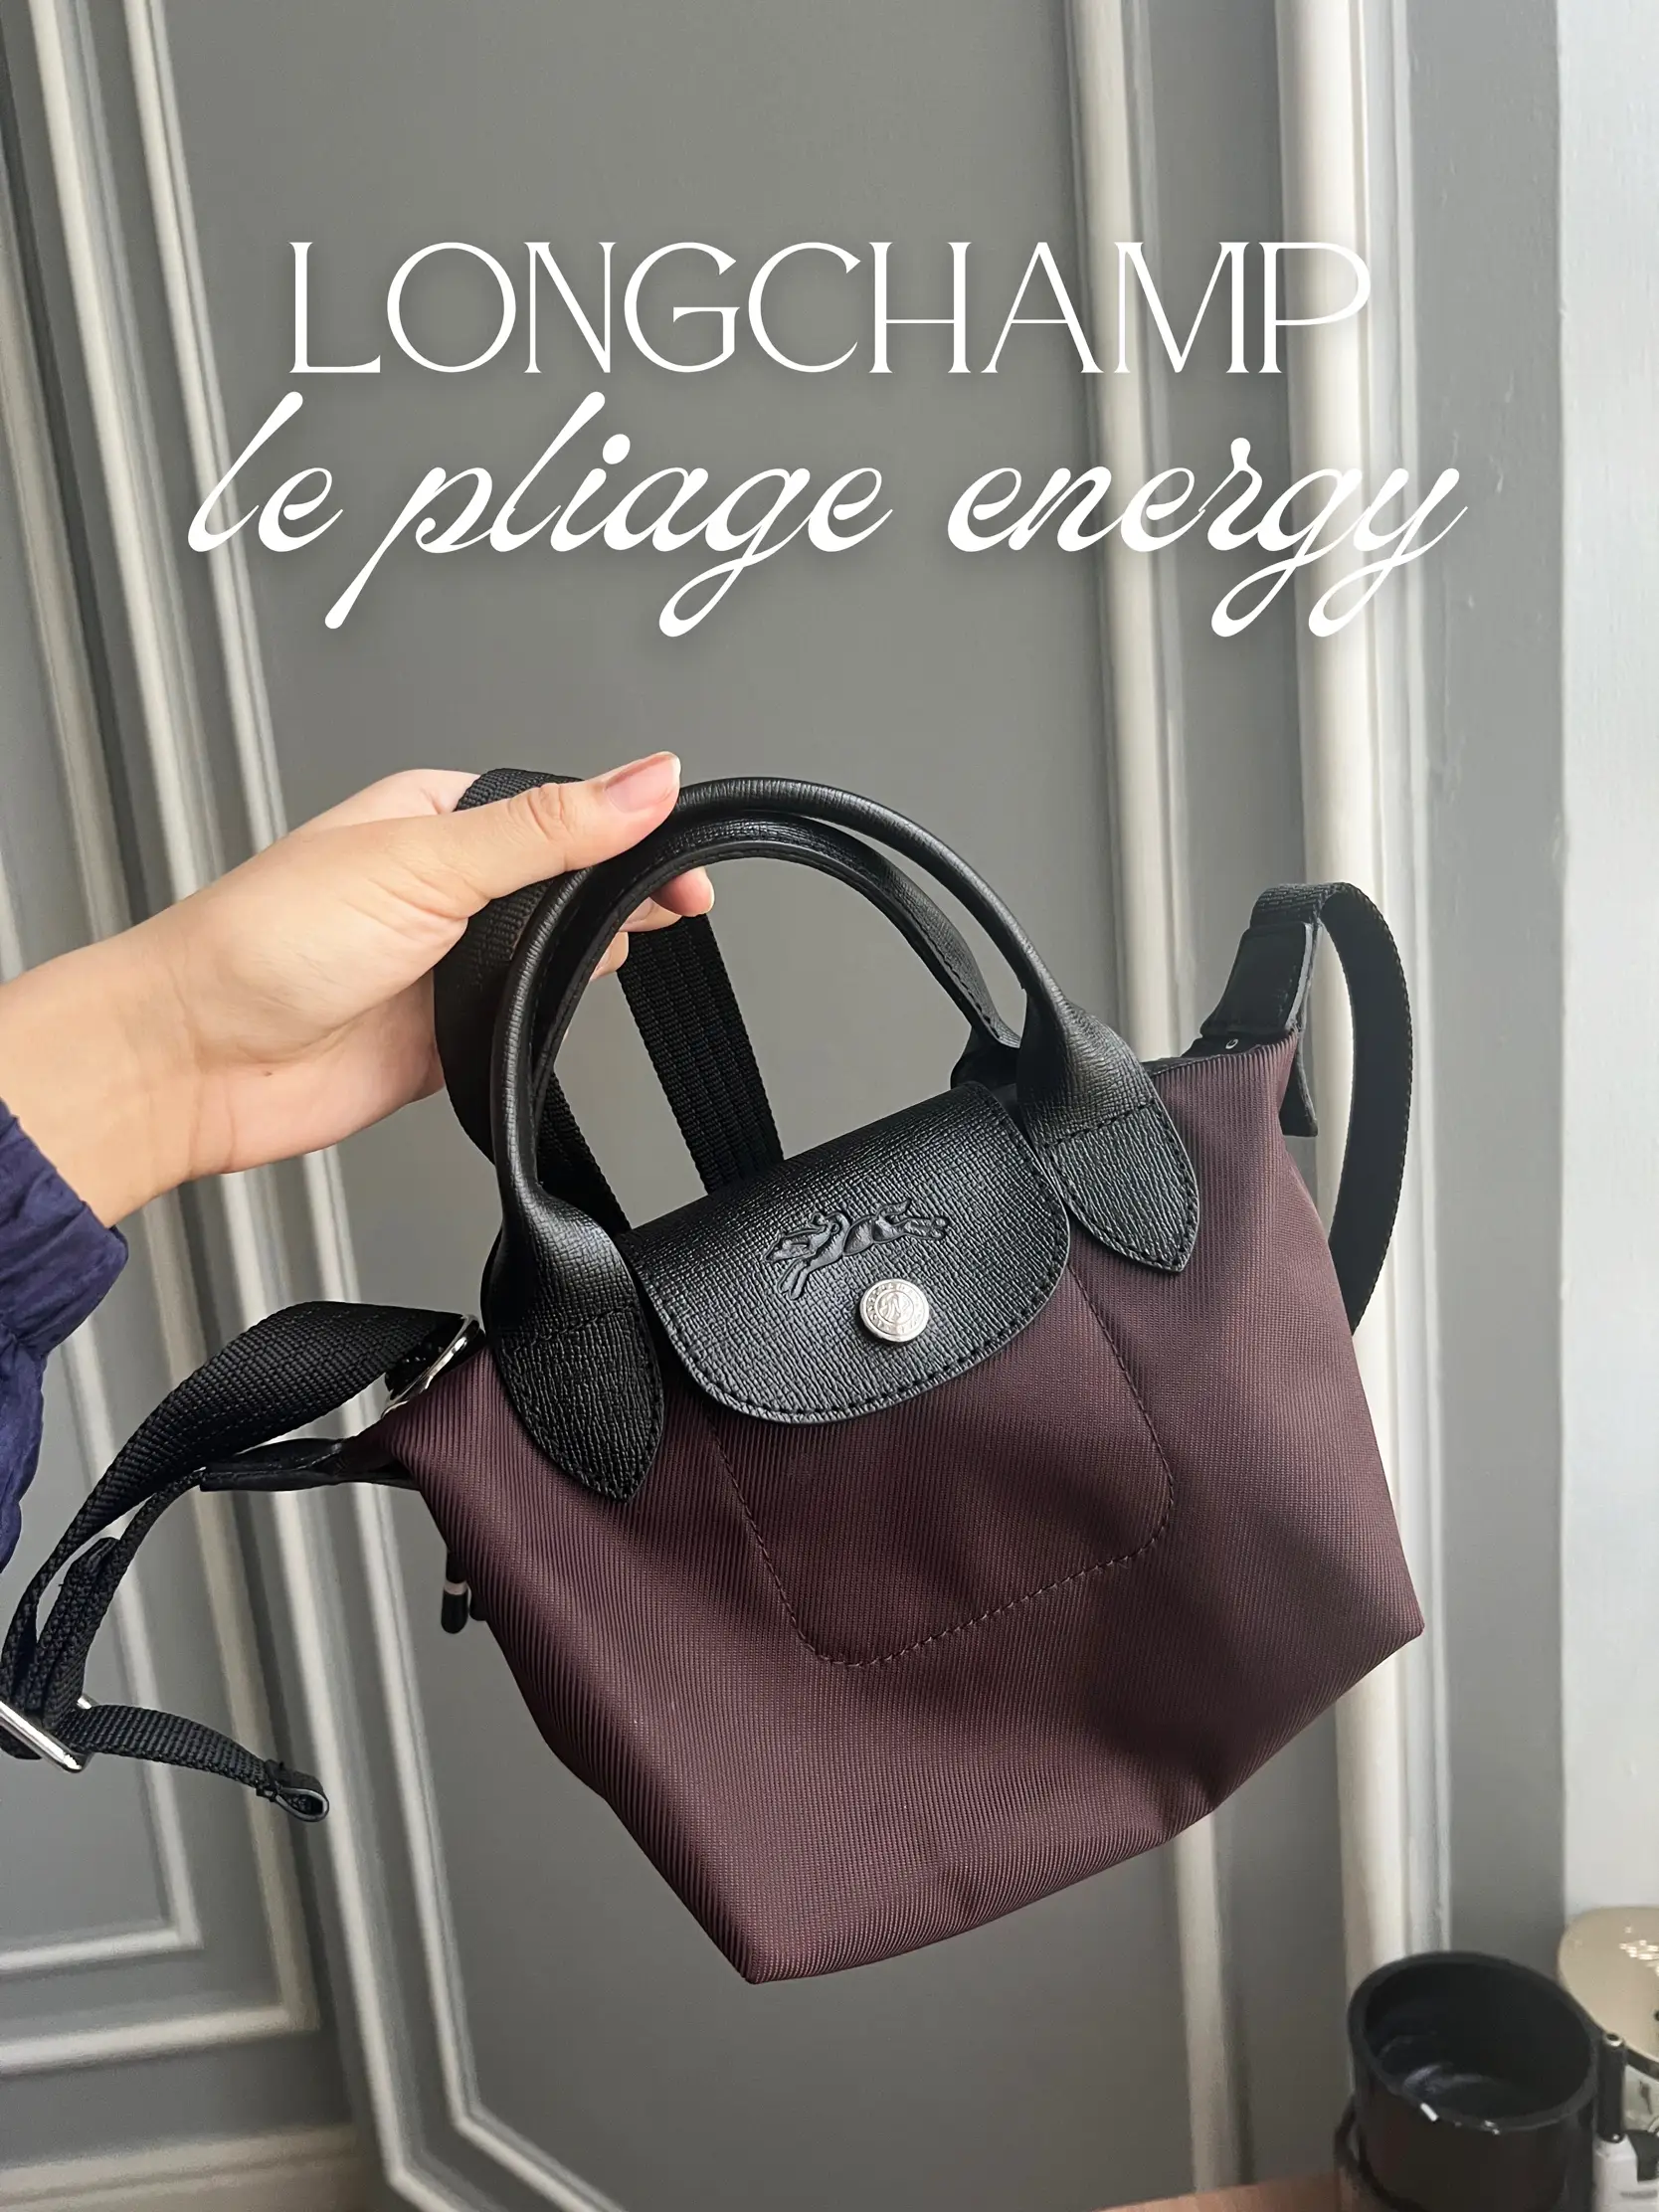 unboxing my lc le pliage city pouch with handle w me<3 #longchamp